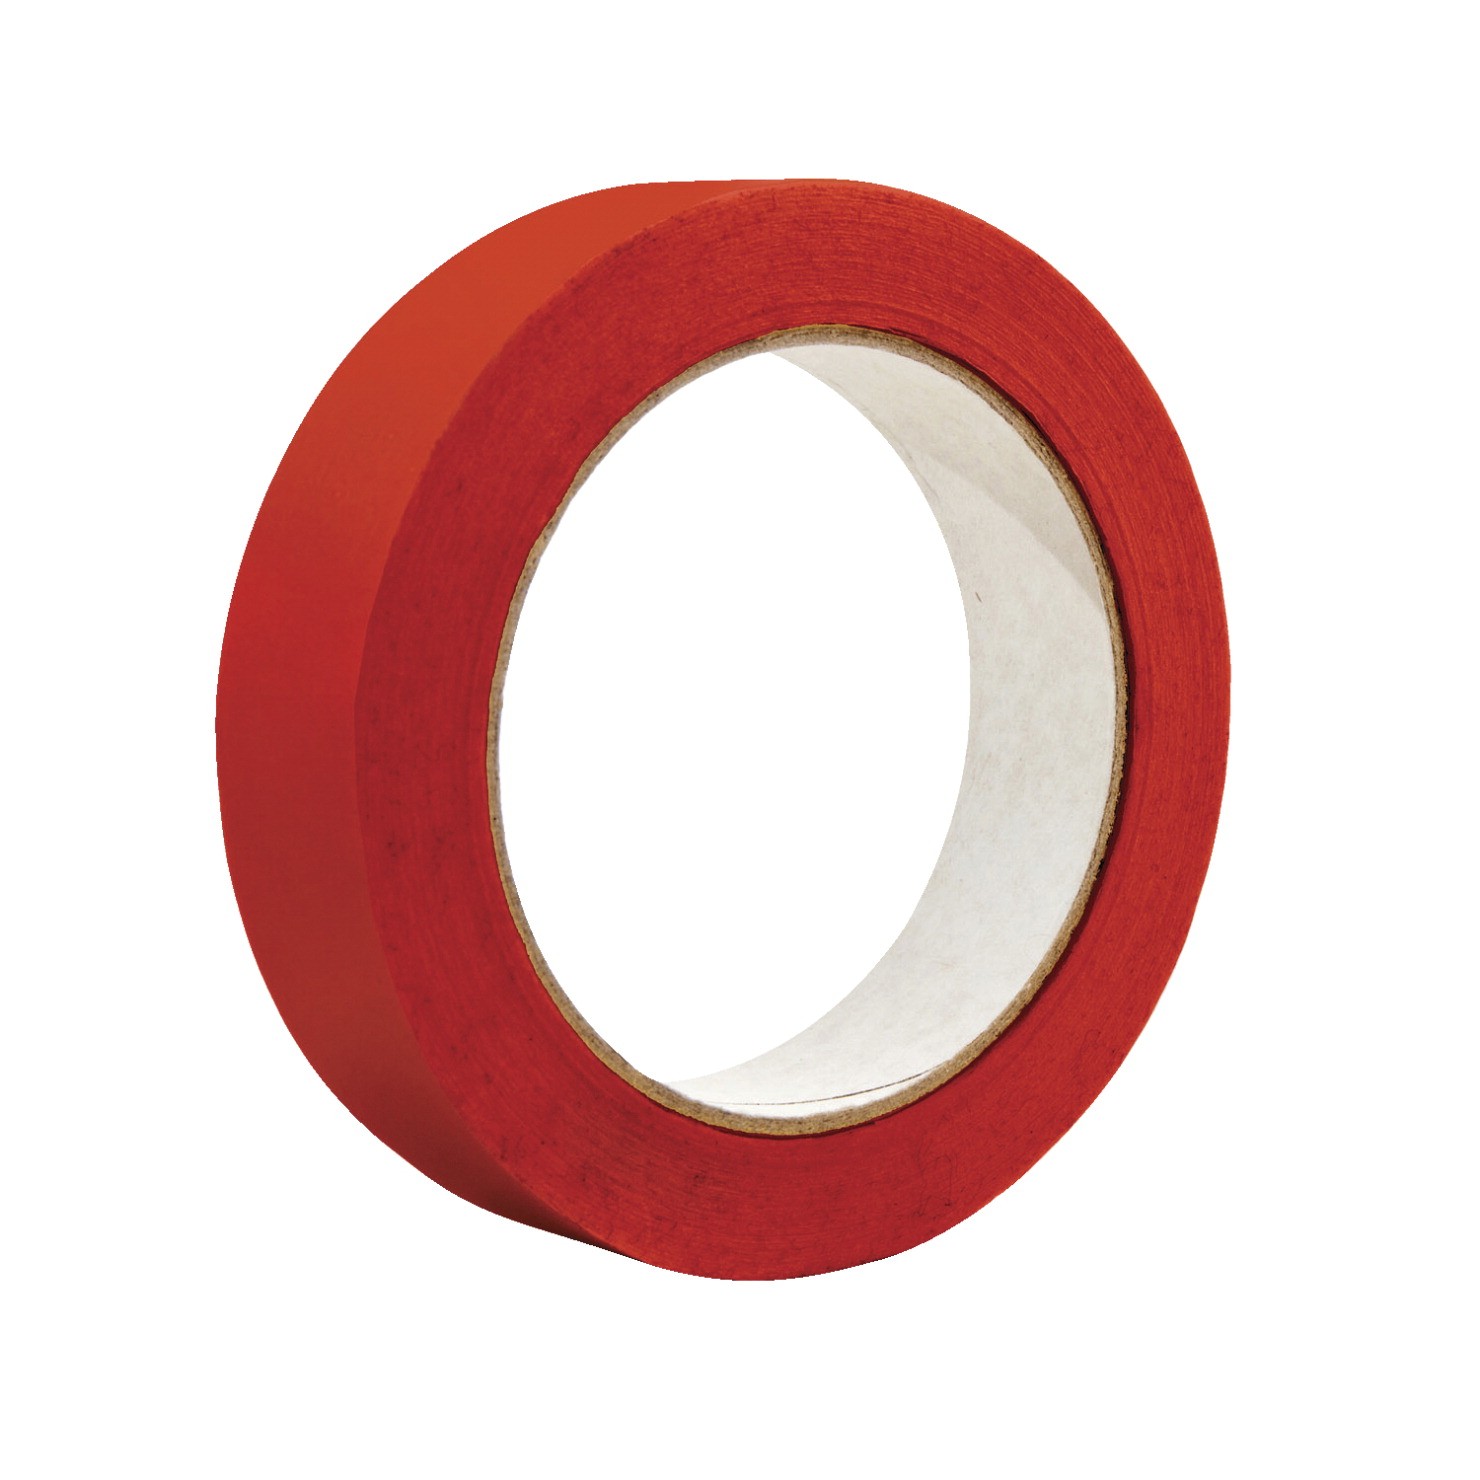 1" Colored Masking Tape, 3" Core, Red - 60 Yds